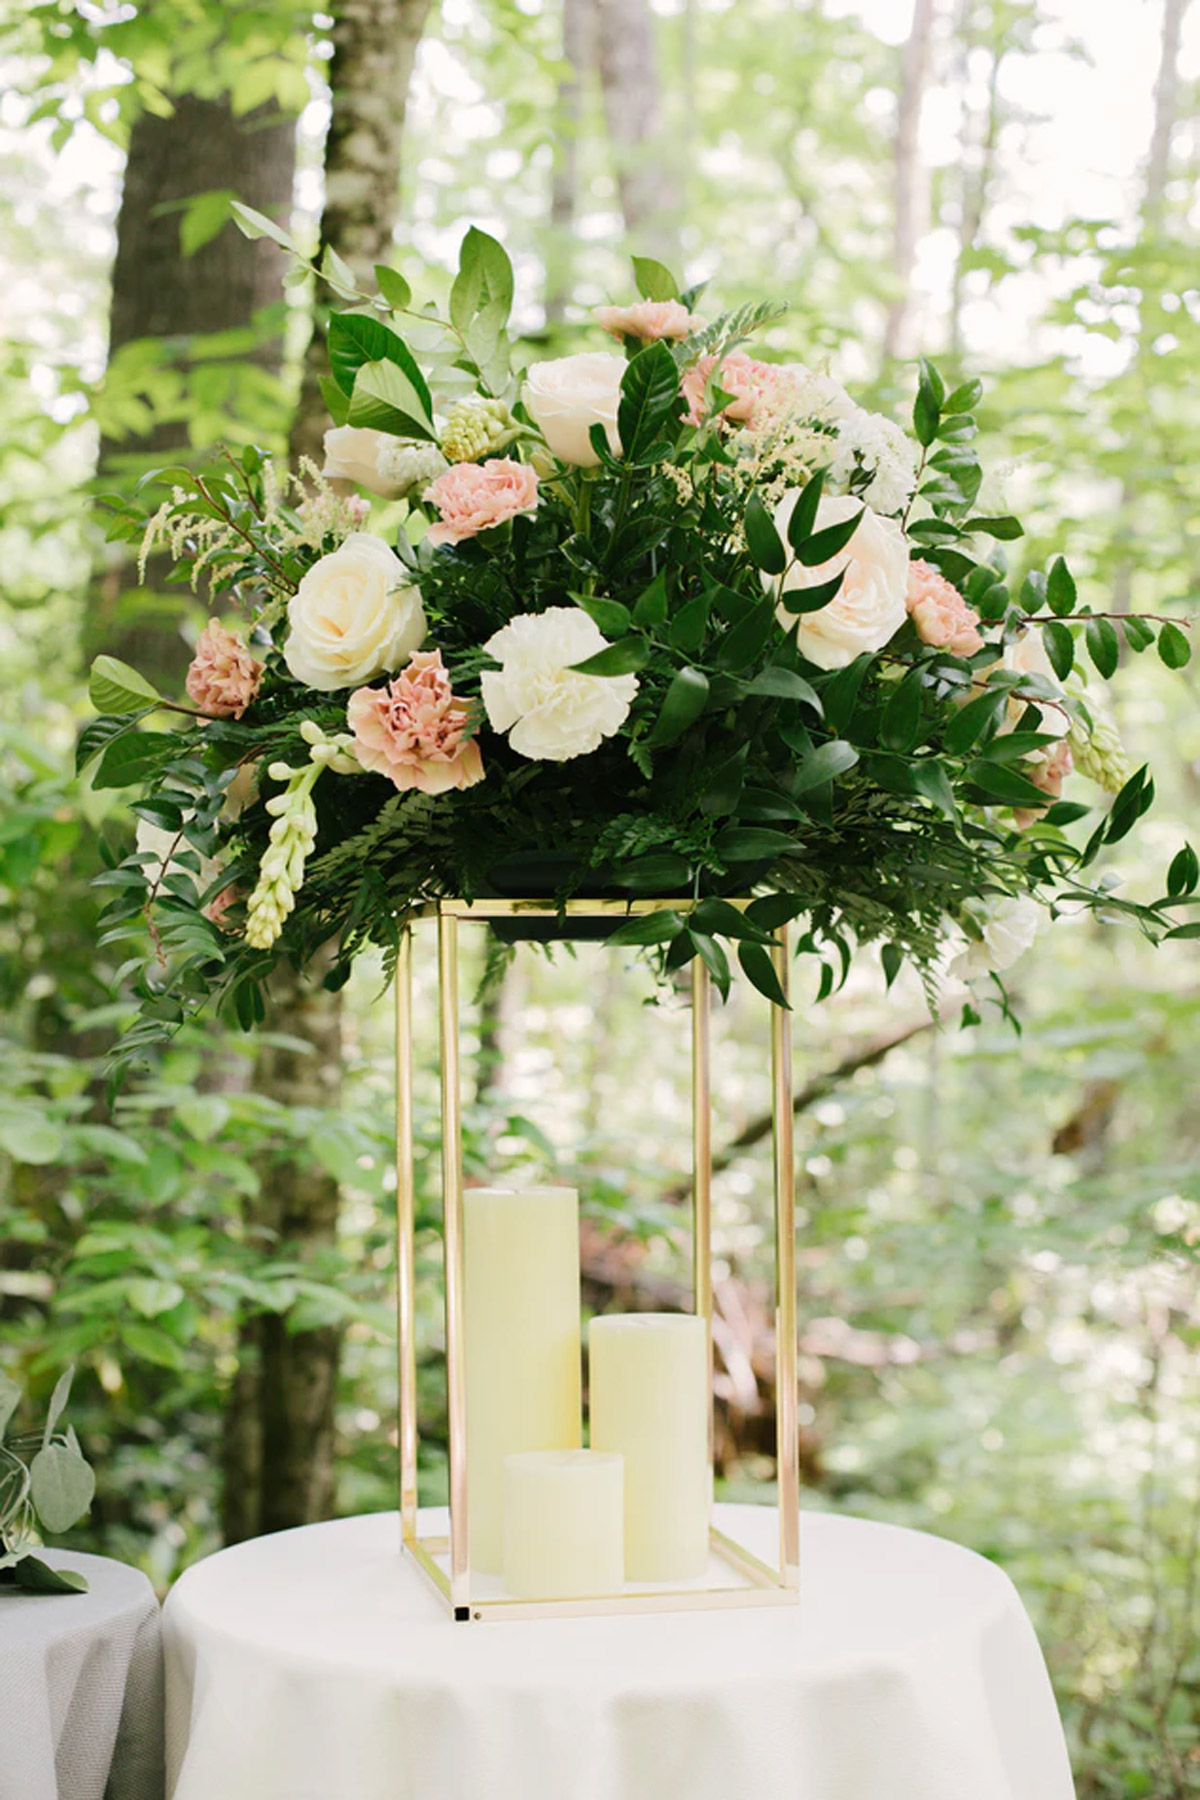 6 Helpful Tips for Choosing the Ideal Wedding Floral Décor